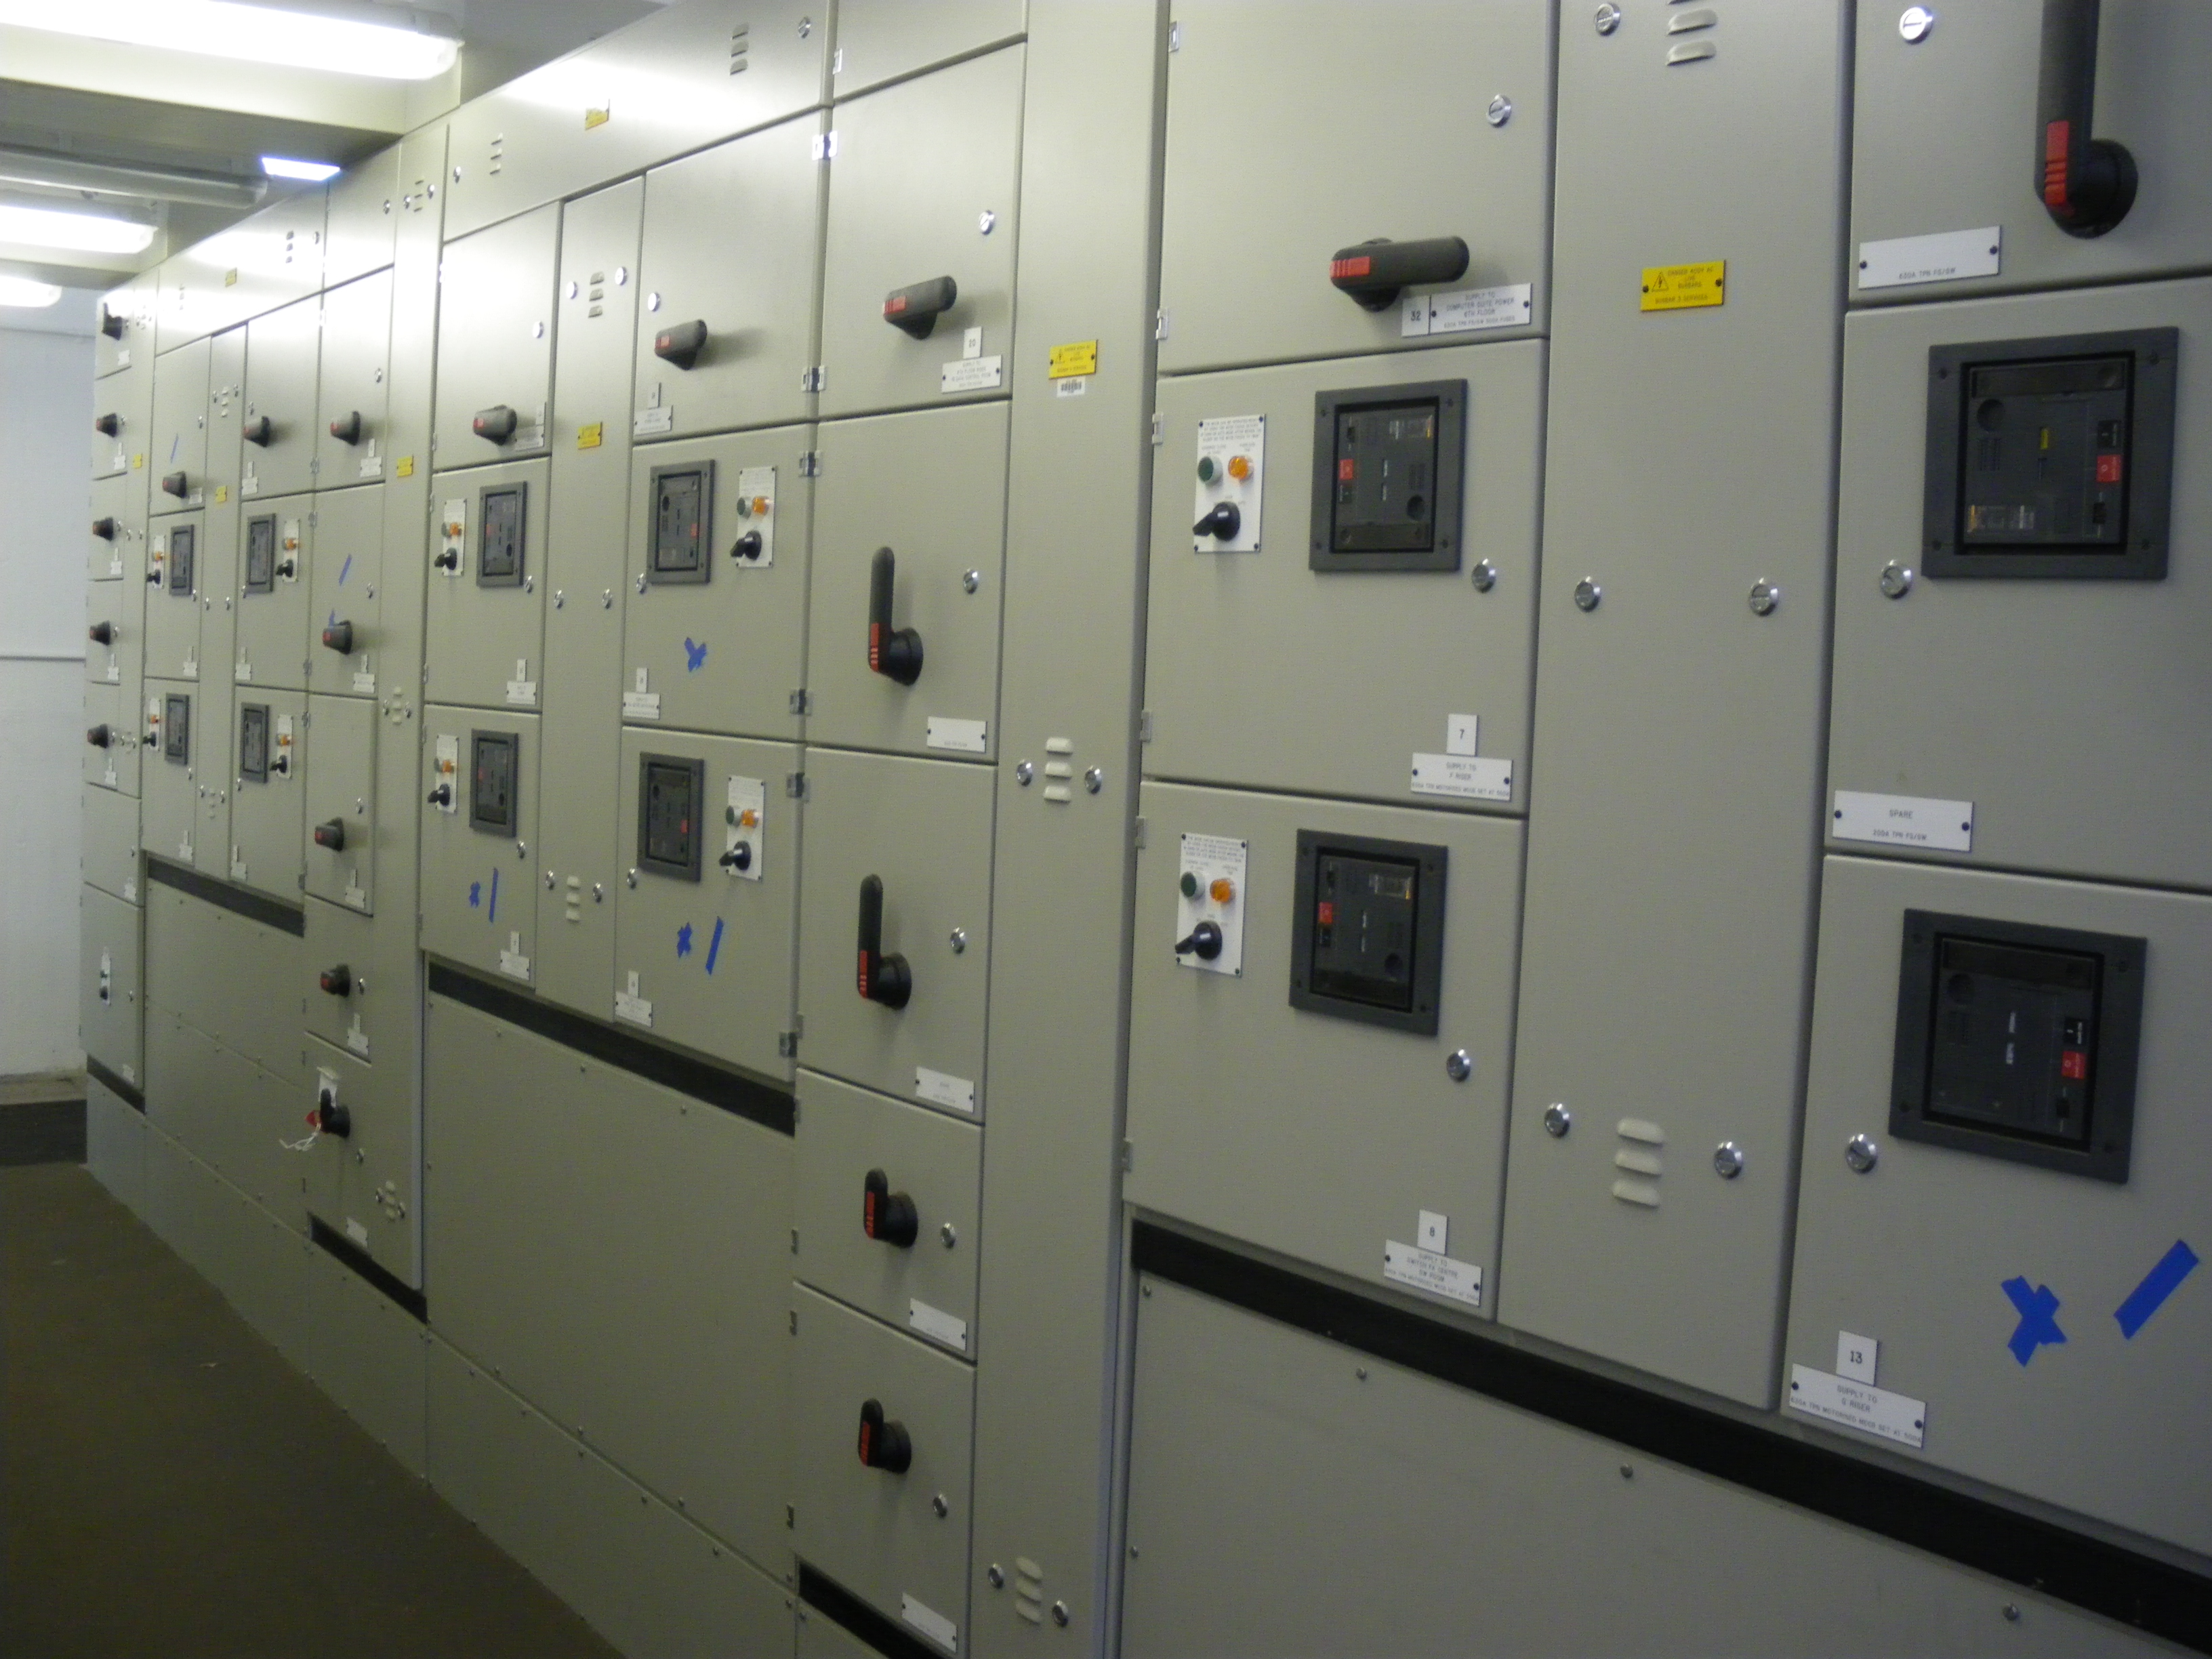 New low voltage distribution board (Substation)